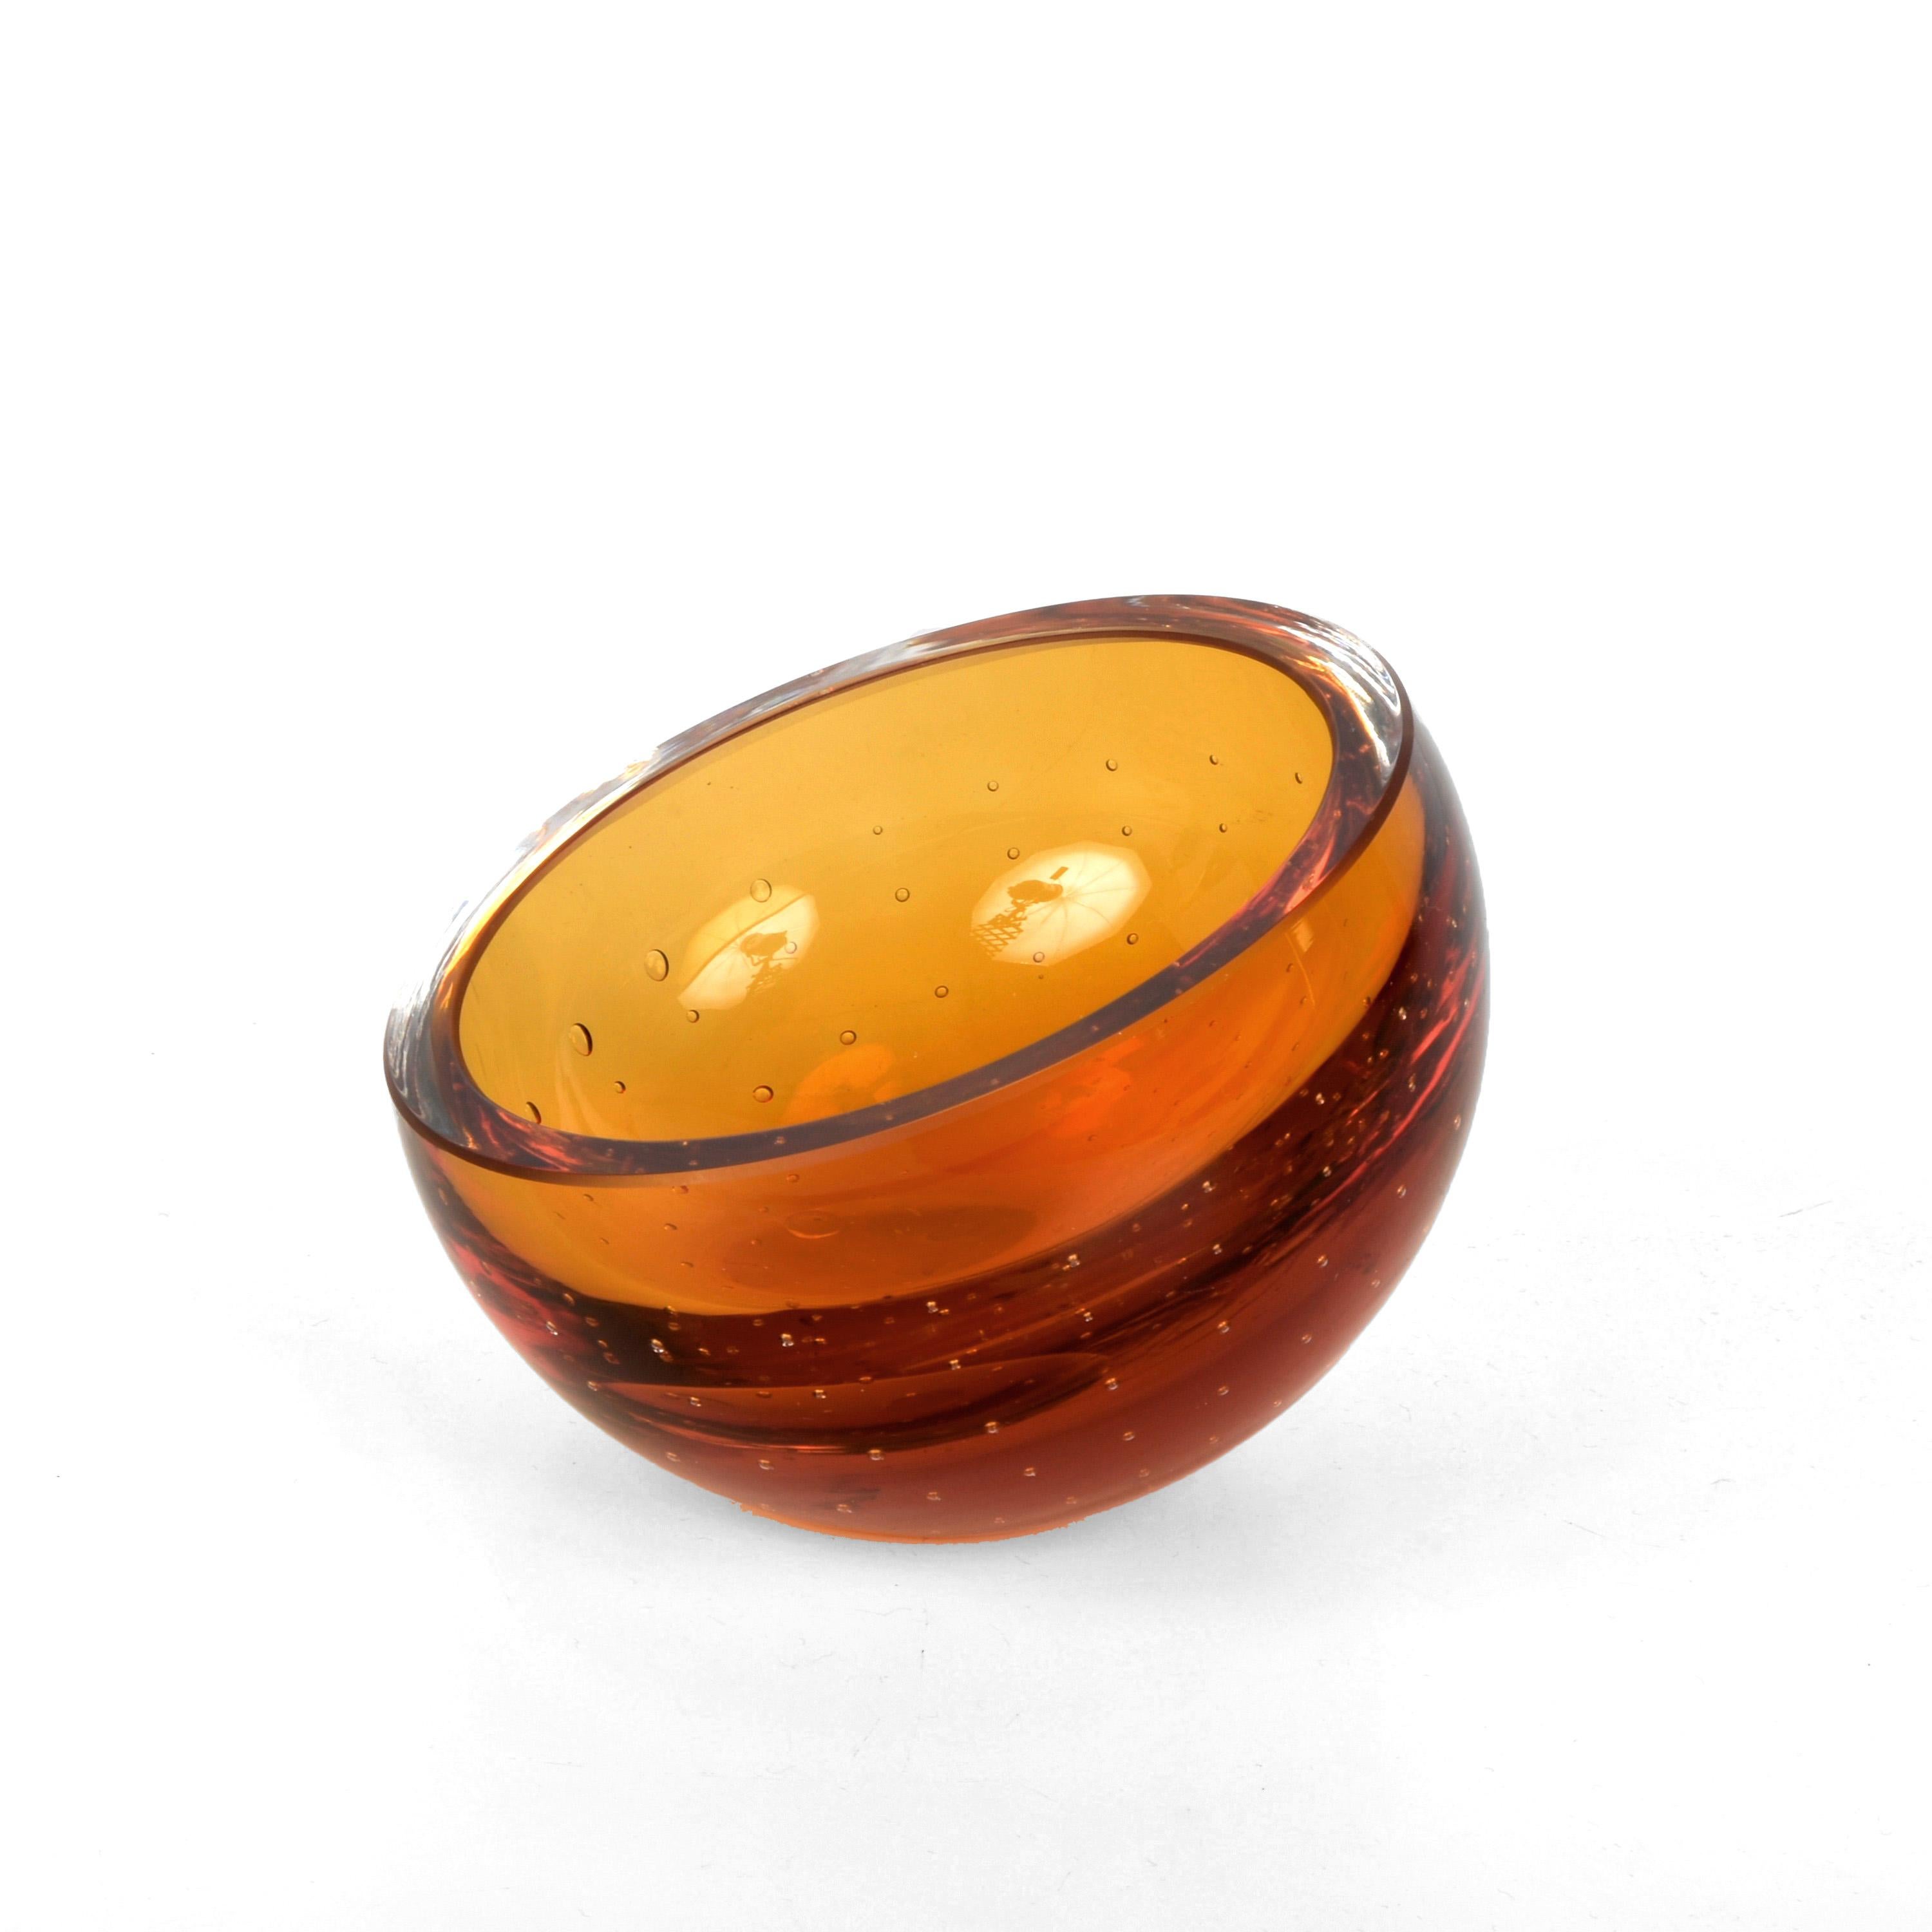 Spectacular mid-century decorative bowl in amber Murano glass with air bubbles (bullicante). This wonderful piece was produced in Italy in the 1960s and is attributed to Galliano Ferro.

This piece is unique for the elegant mix of peculiar